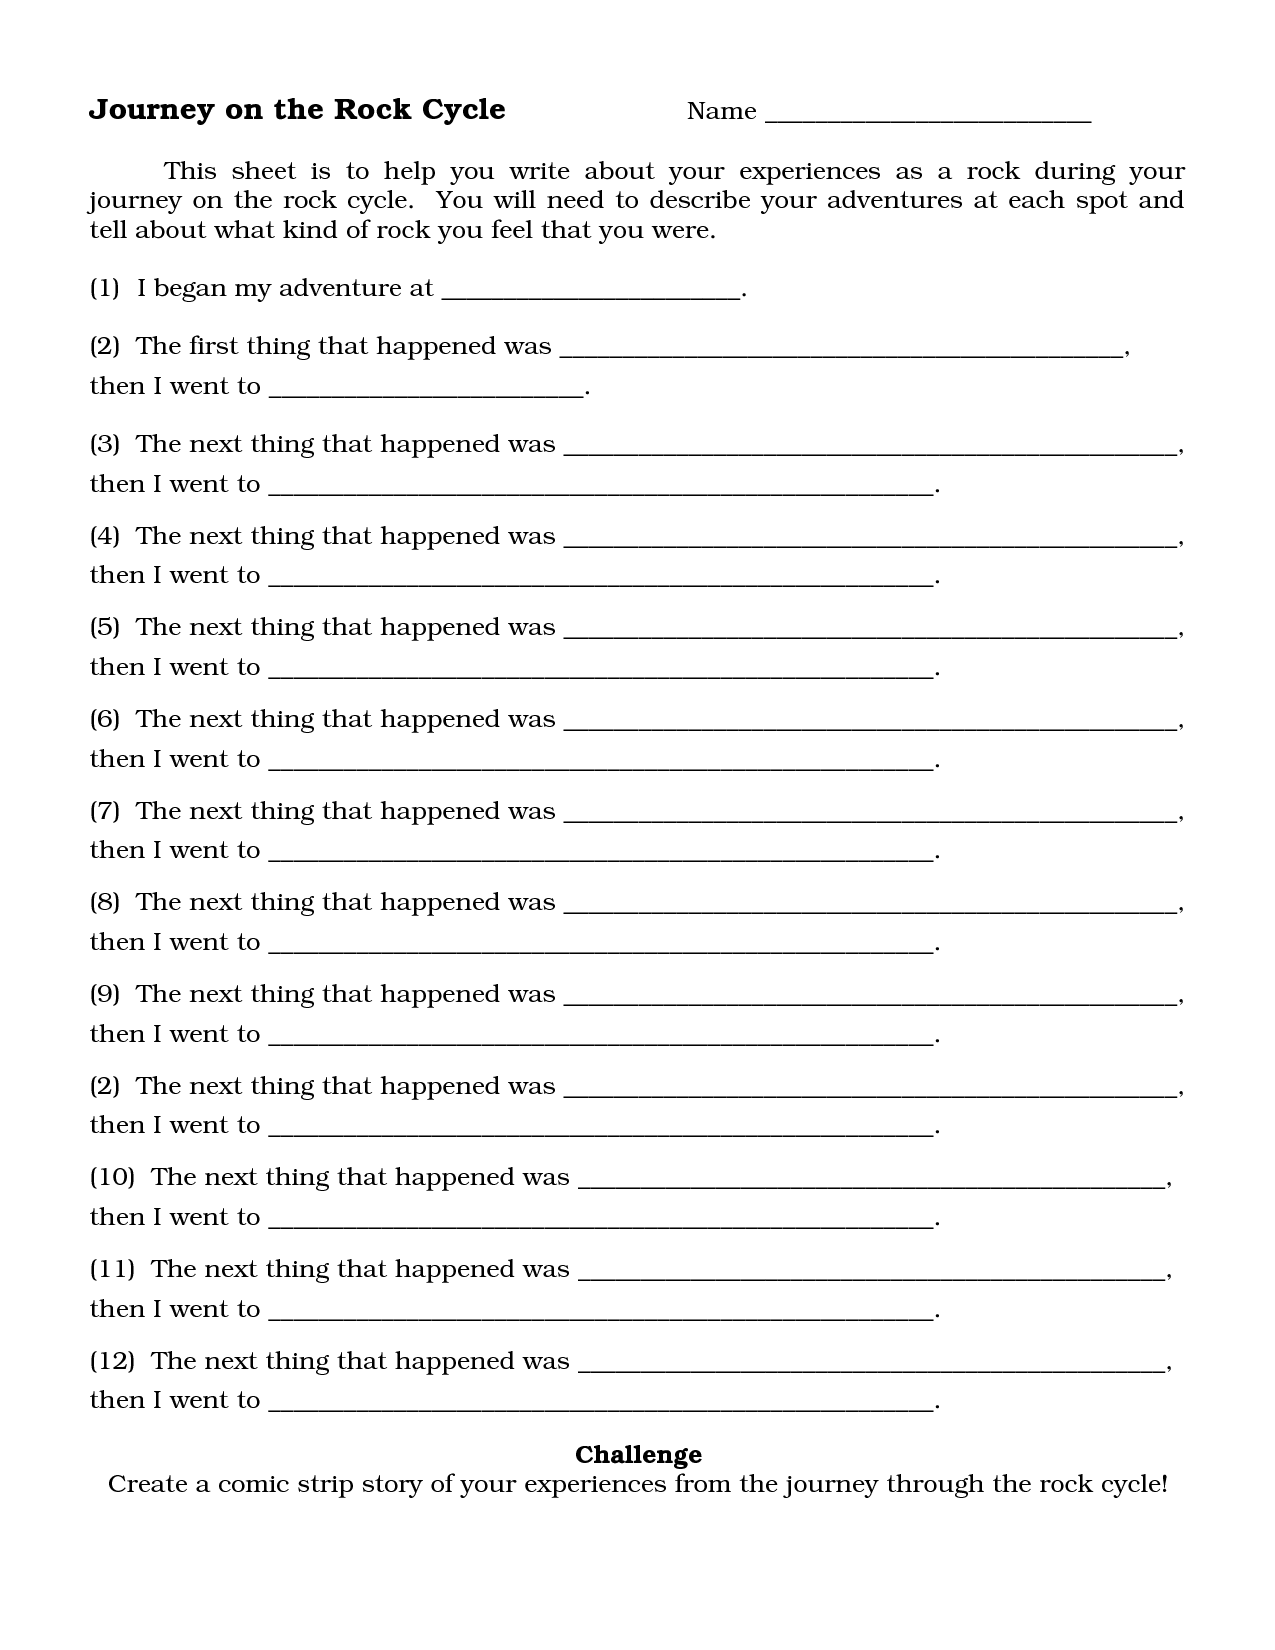 7 Best Images of Printable Rock Cycle Worksheets 6th Grade Science